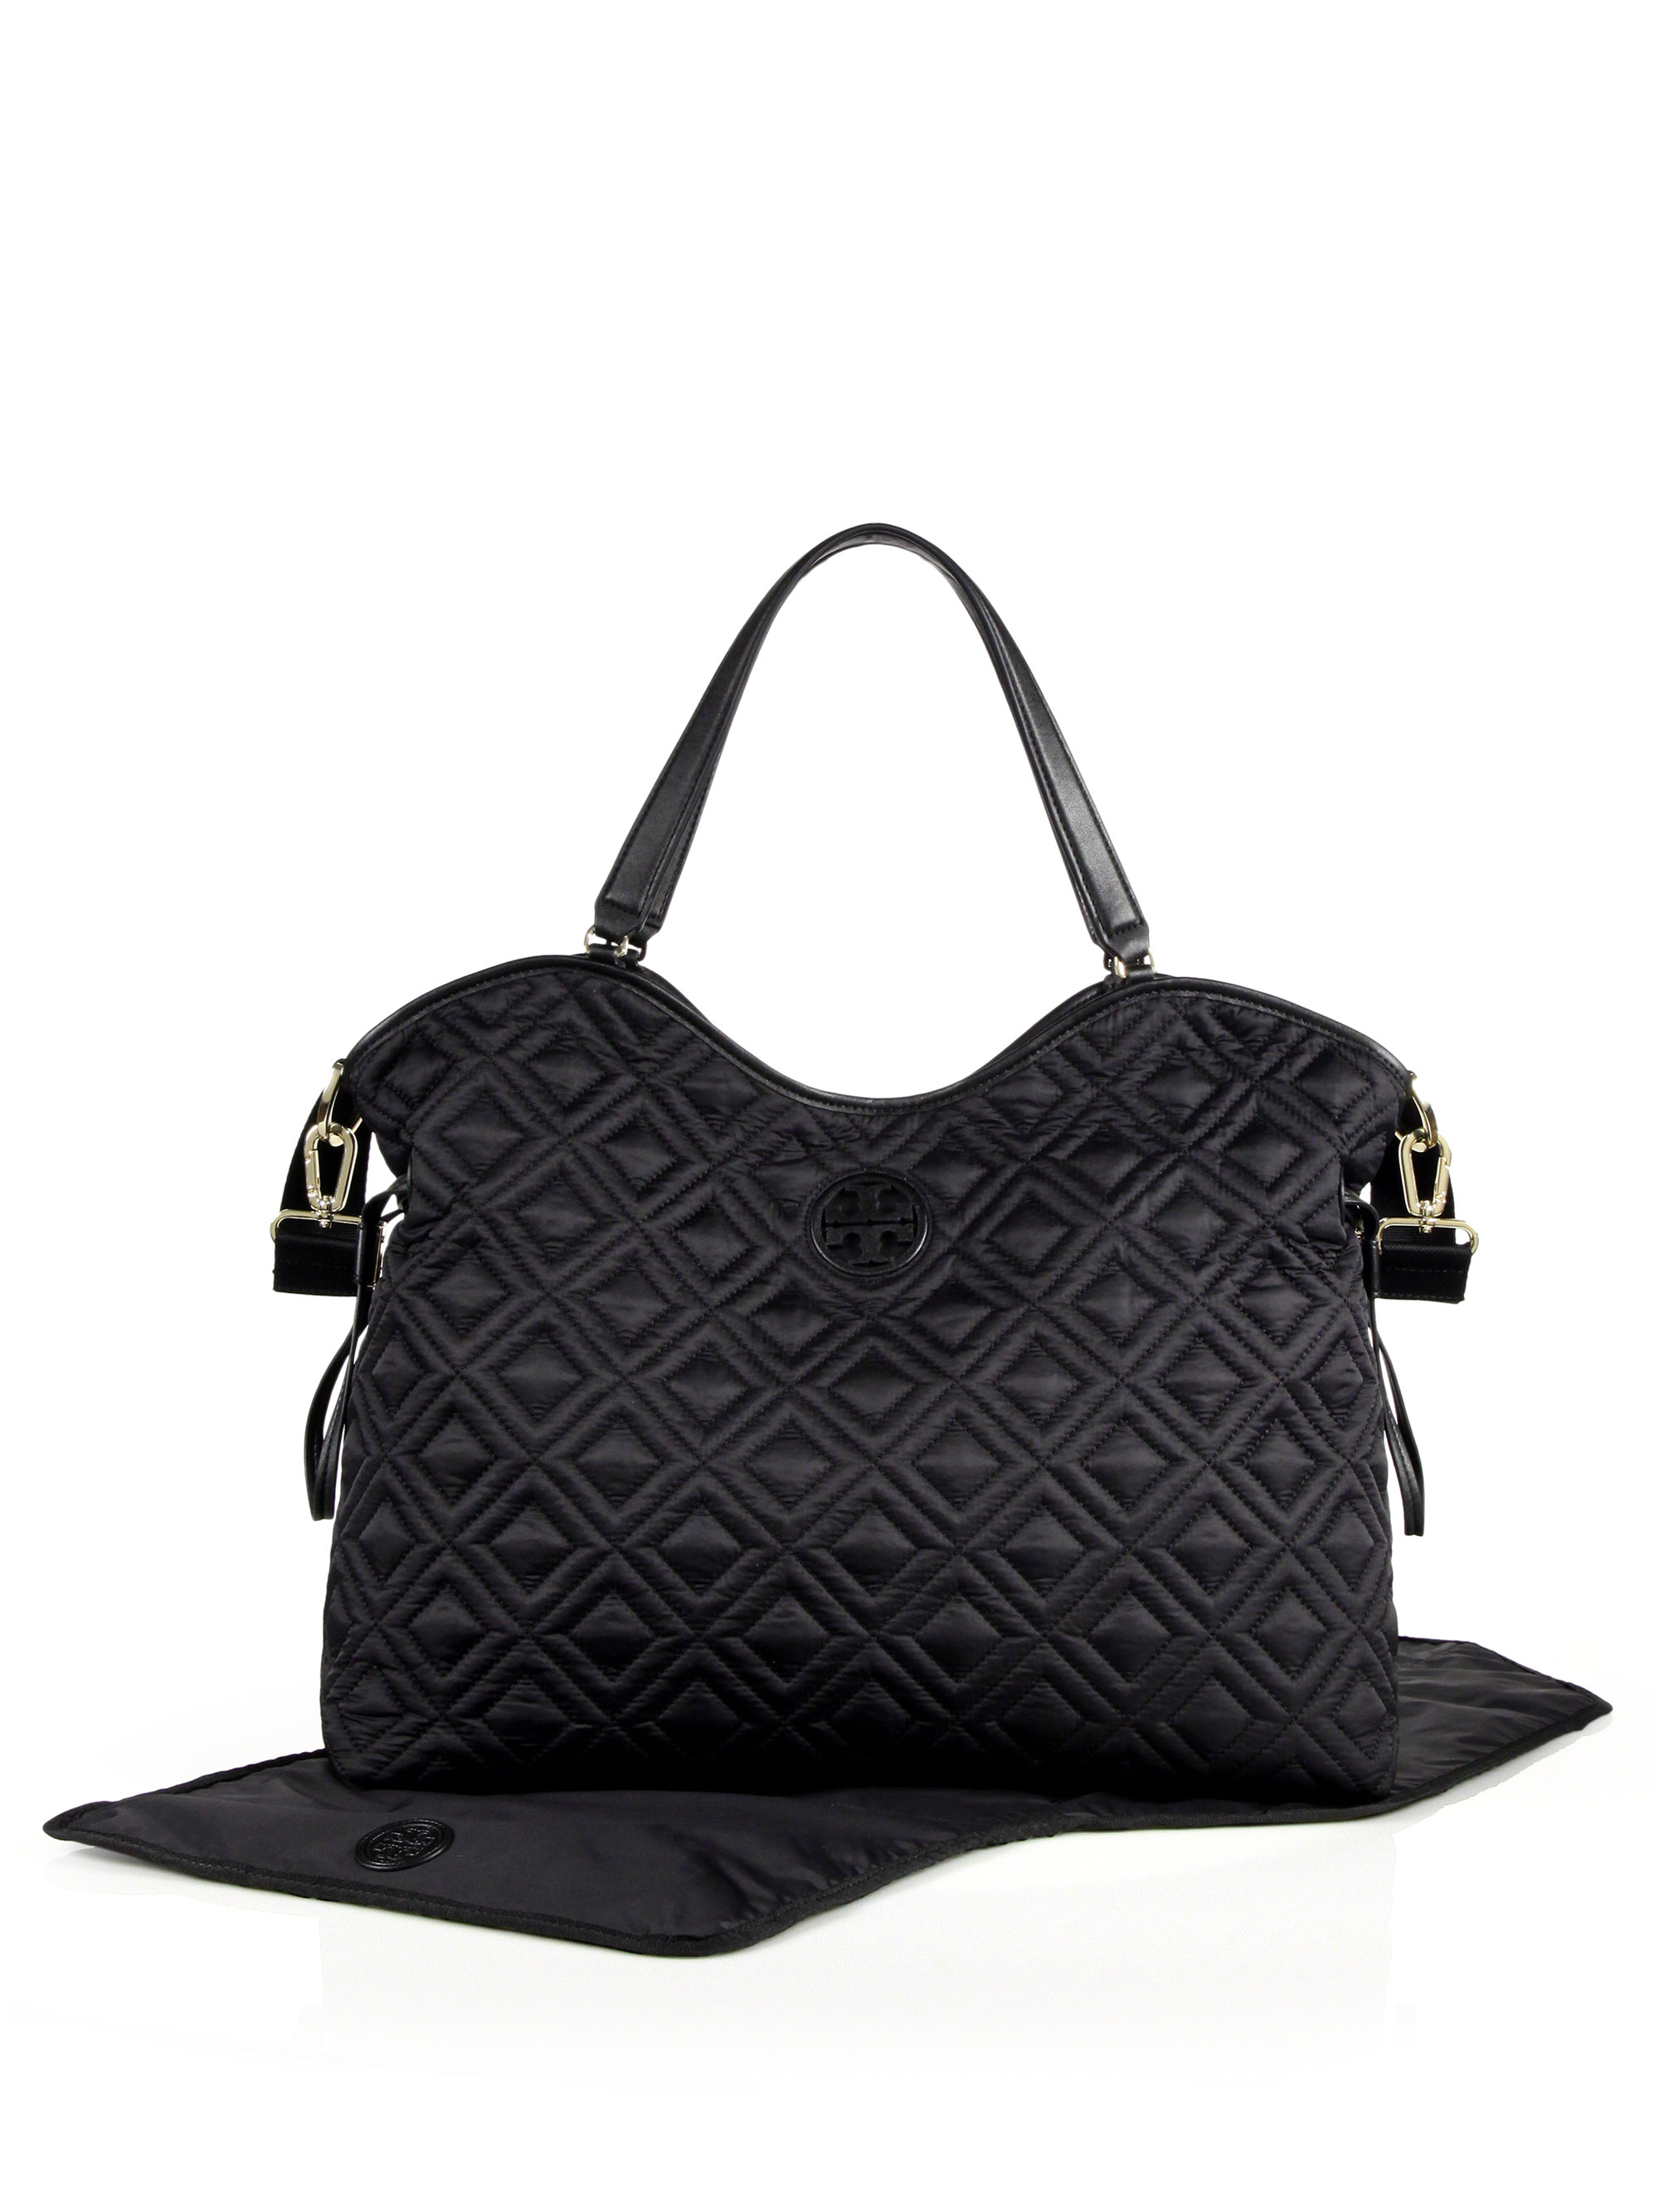 Lyst - Tory Burch Marion Quilted Nylon Baby Bag in Black